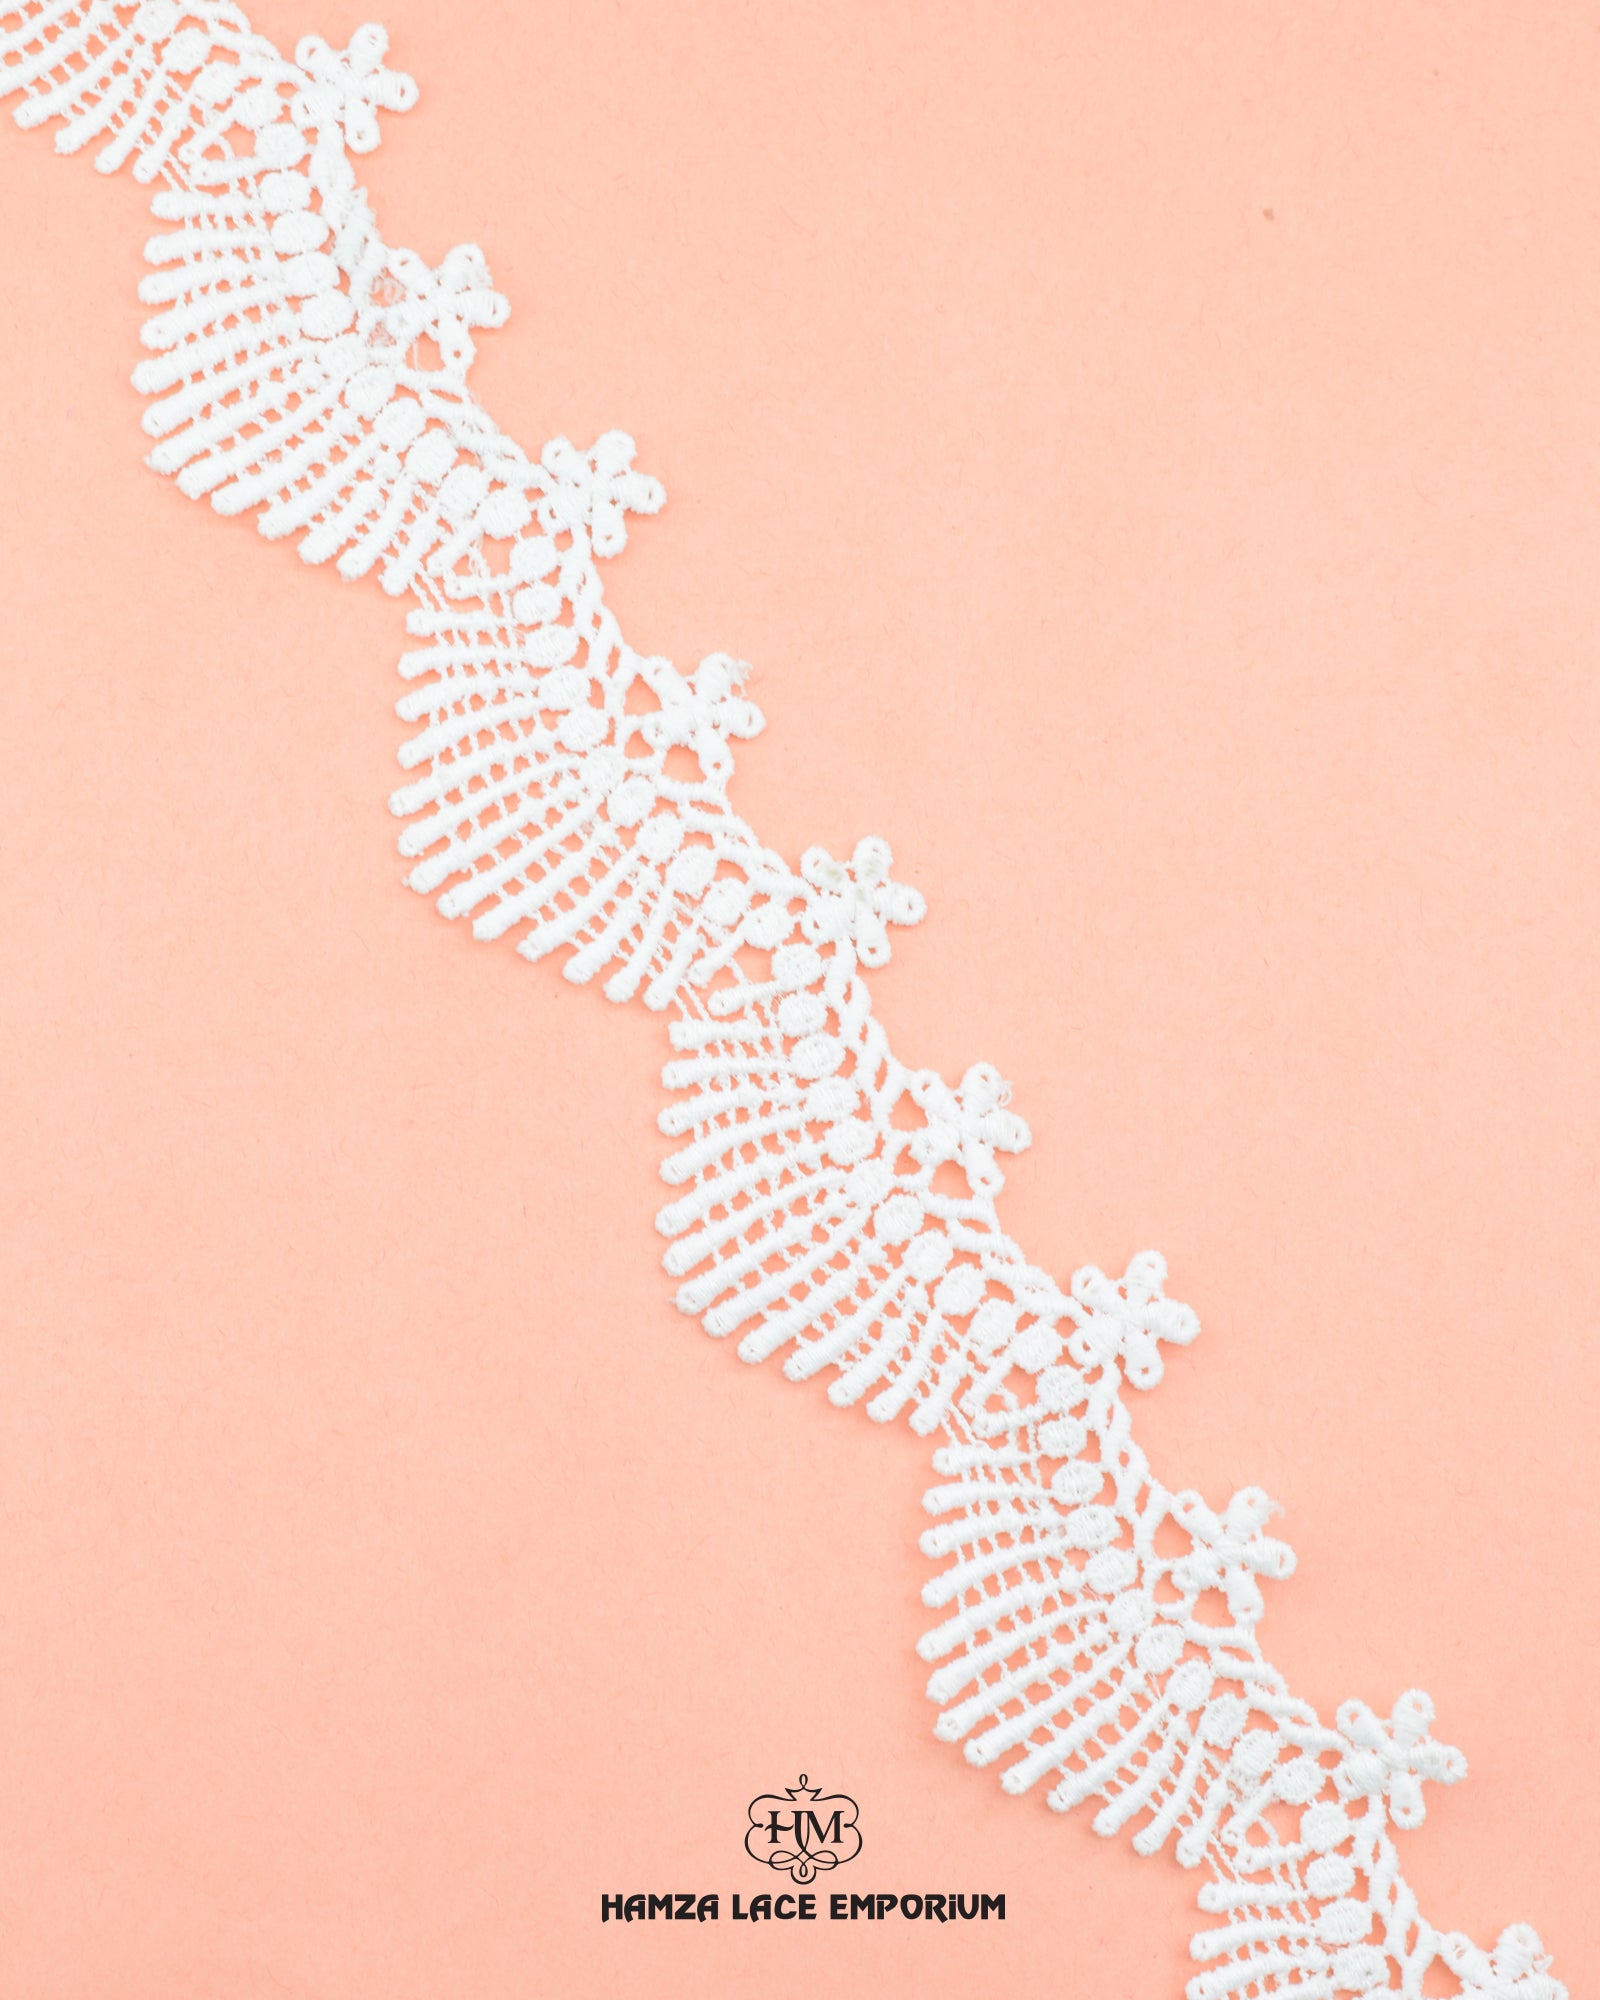 A white 'Edging Scallop Lace 3881' with the vendor name 'Hamza Lace' and it's logo